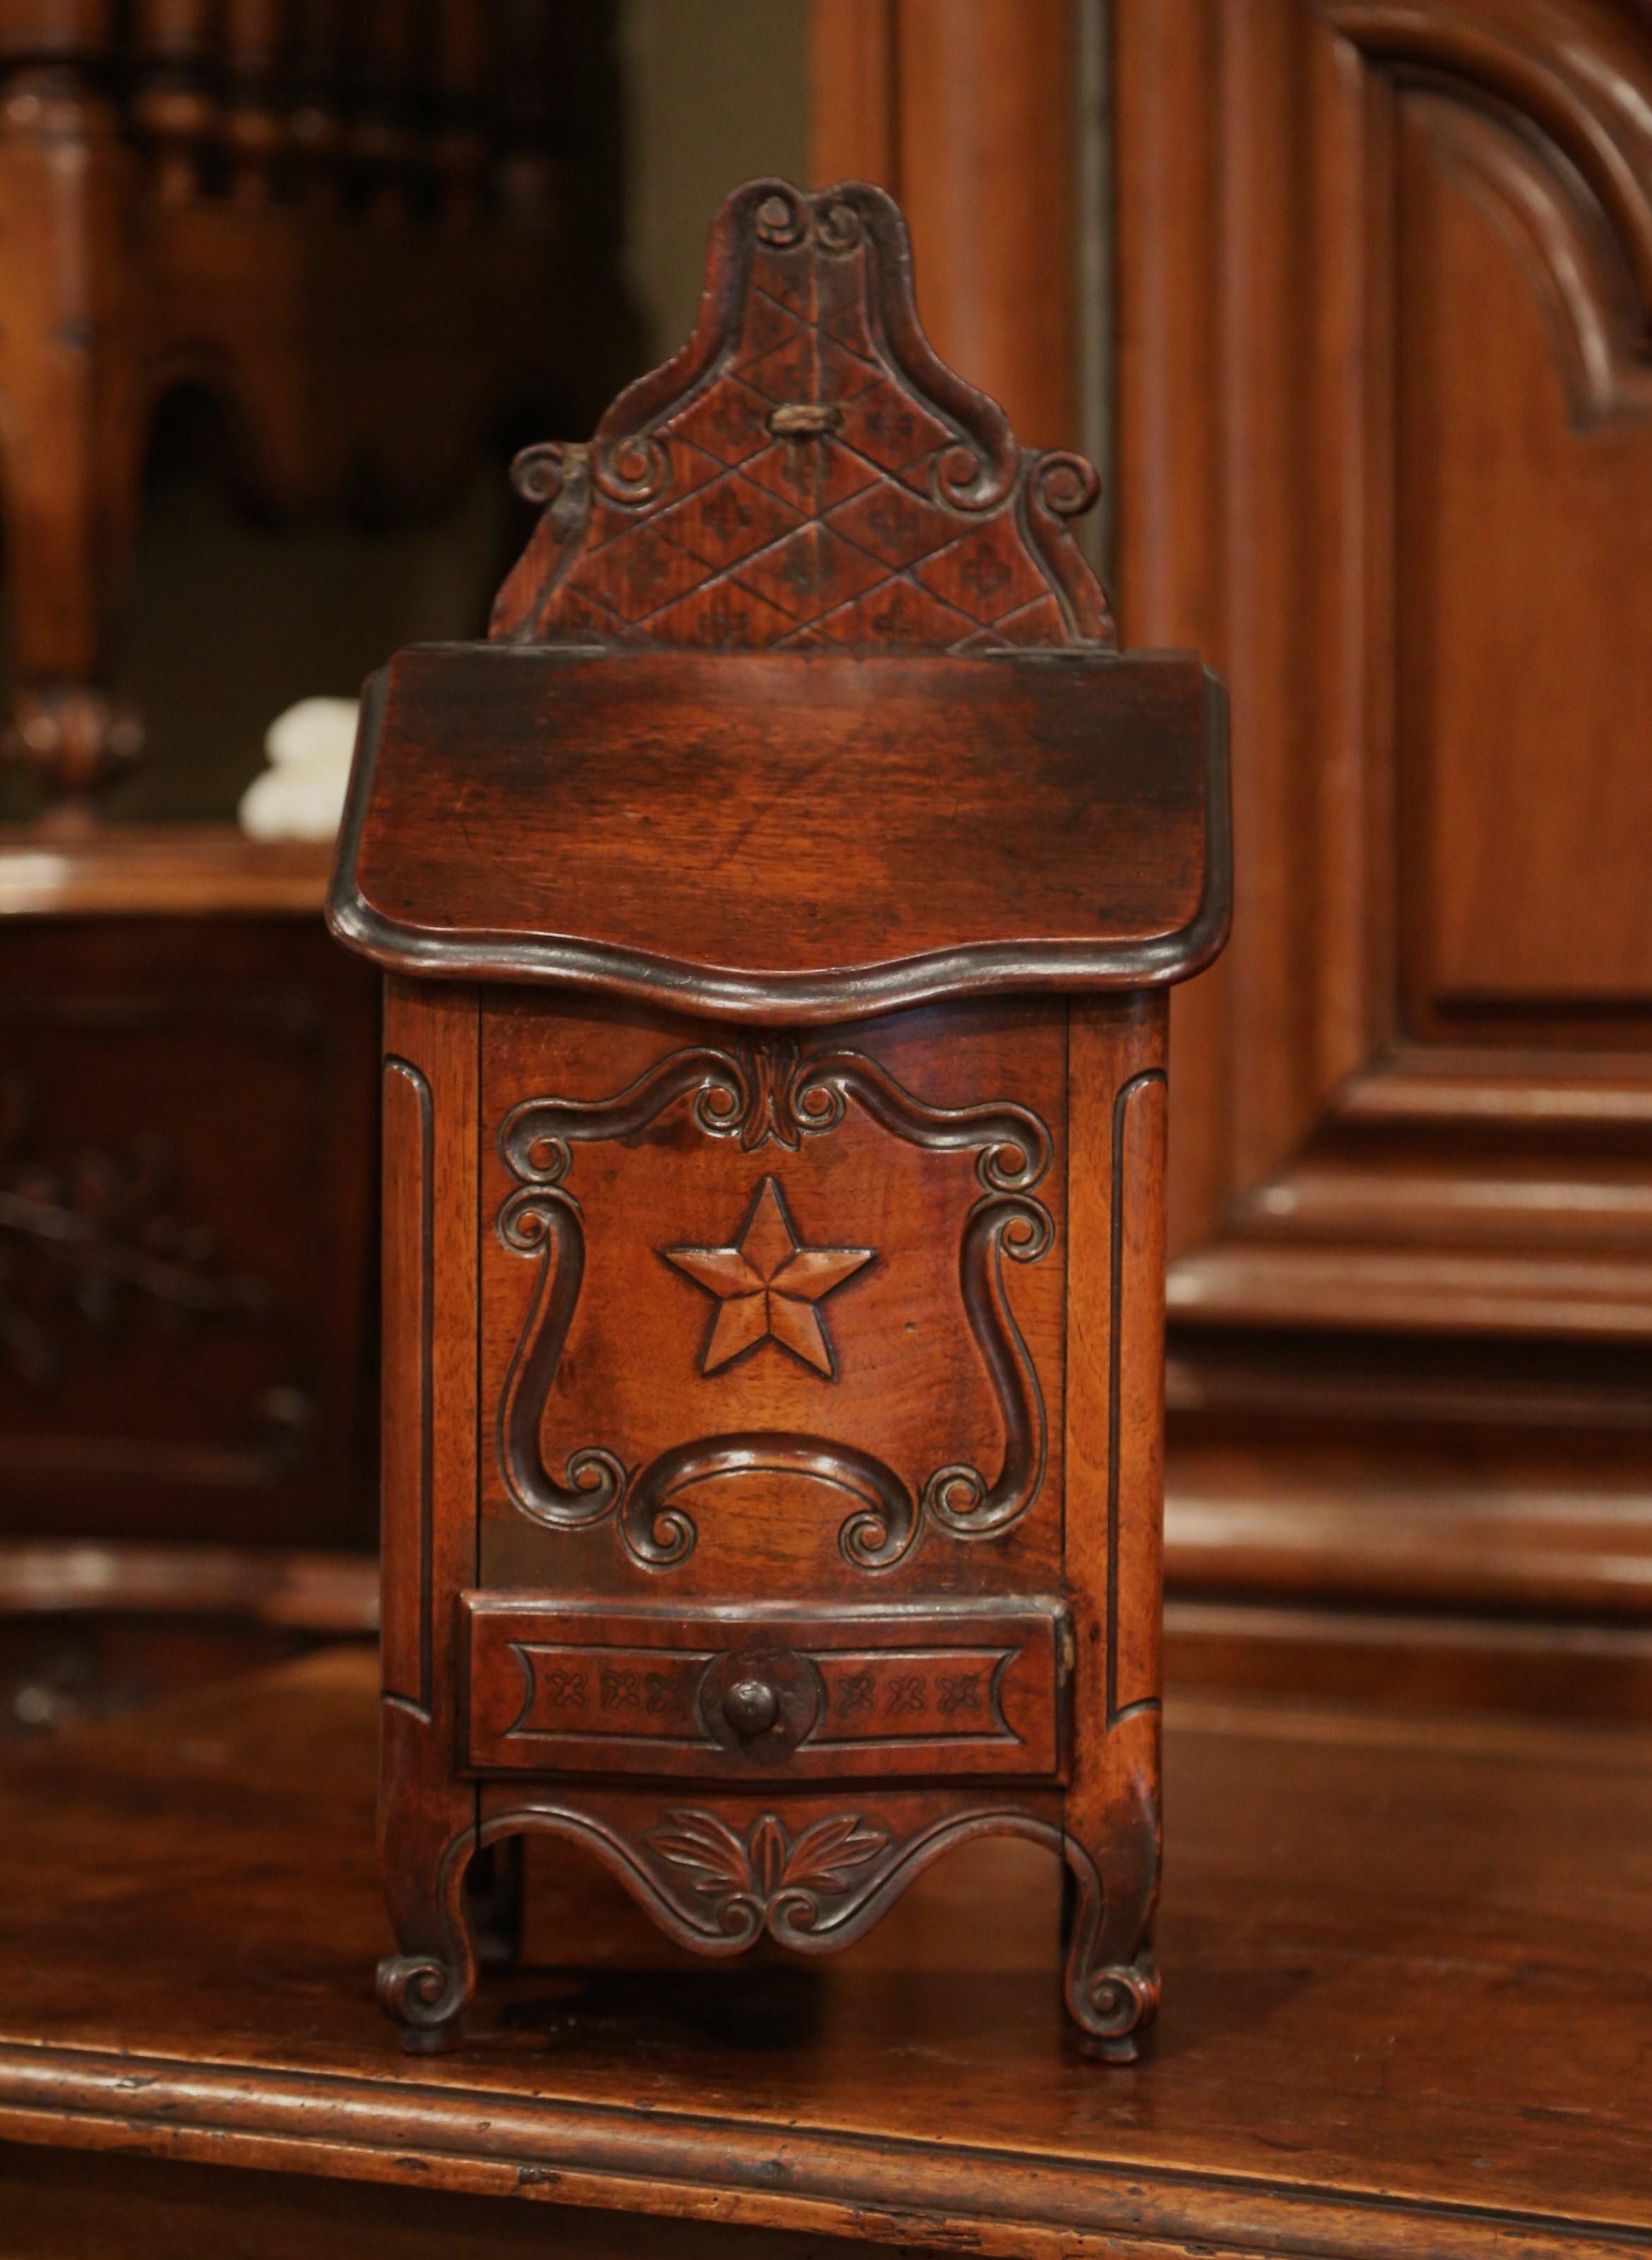 This elegant, antique fruitwood salt box was crafted in southern, France, circa 1880. The ornate, decorative, walnut box sits on delicate escargot feet and features beautiful carvings throughout. The bombe box is carved with floral decor on the